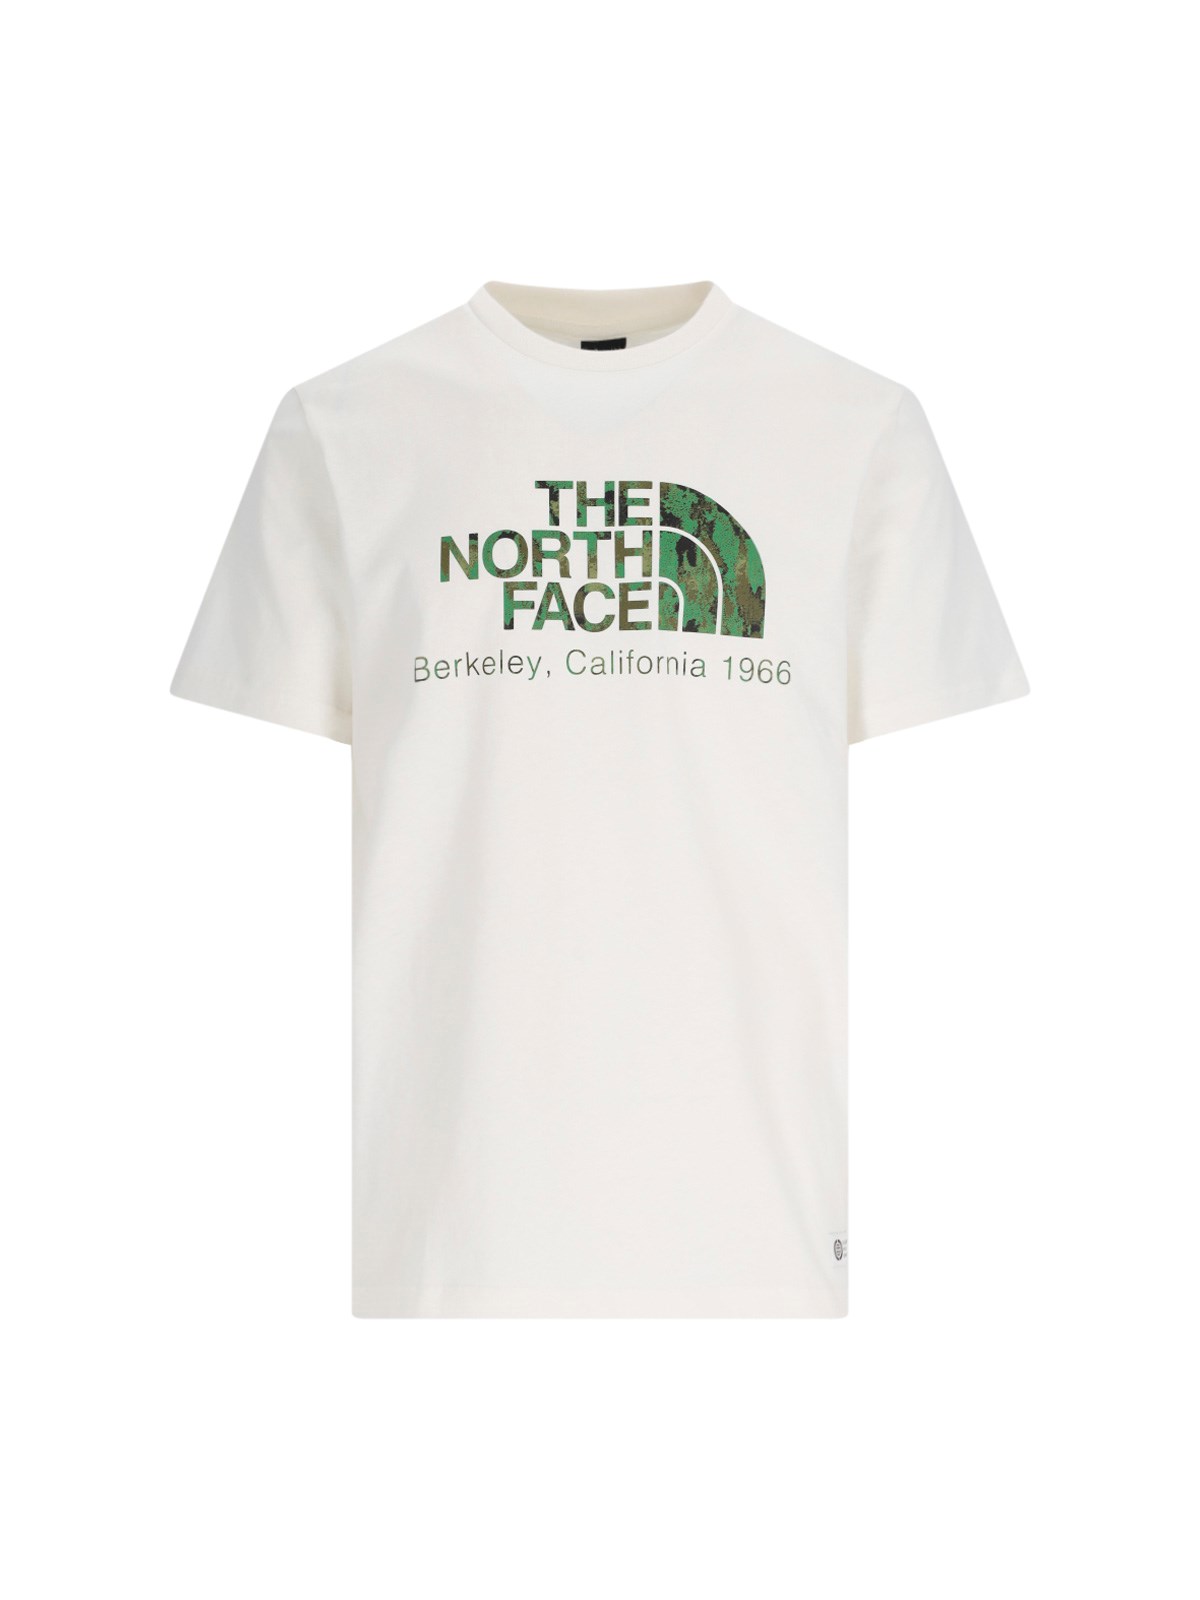 The North Face 'berkley' T-shirt In White